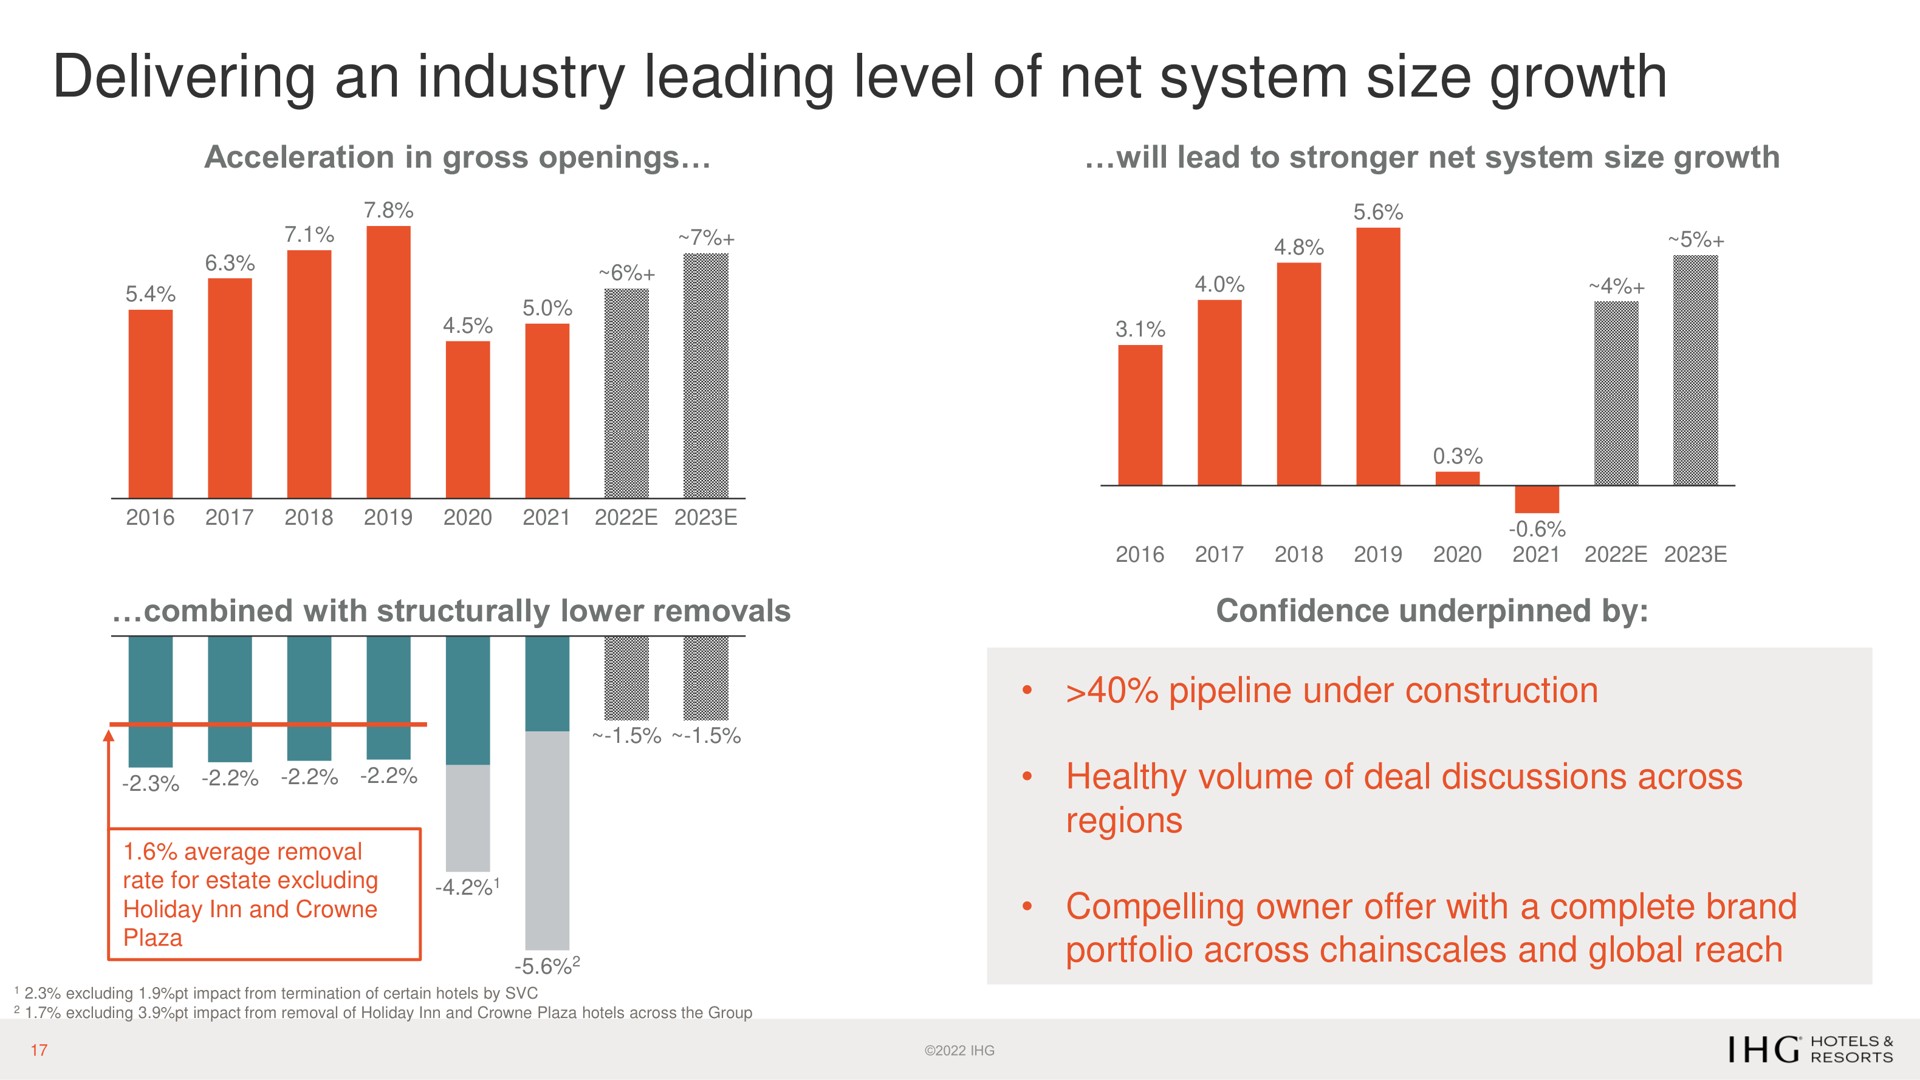 delivering an industry leading level of net system size growth | IHG Hotels